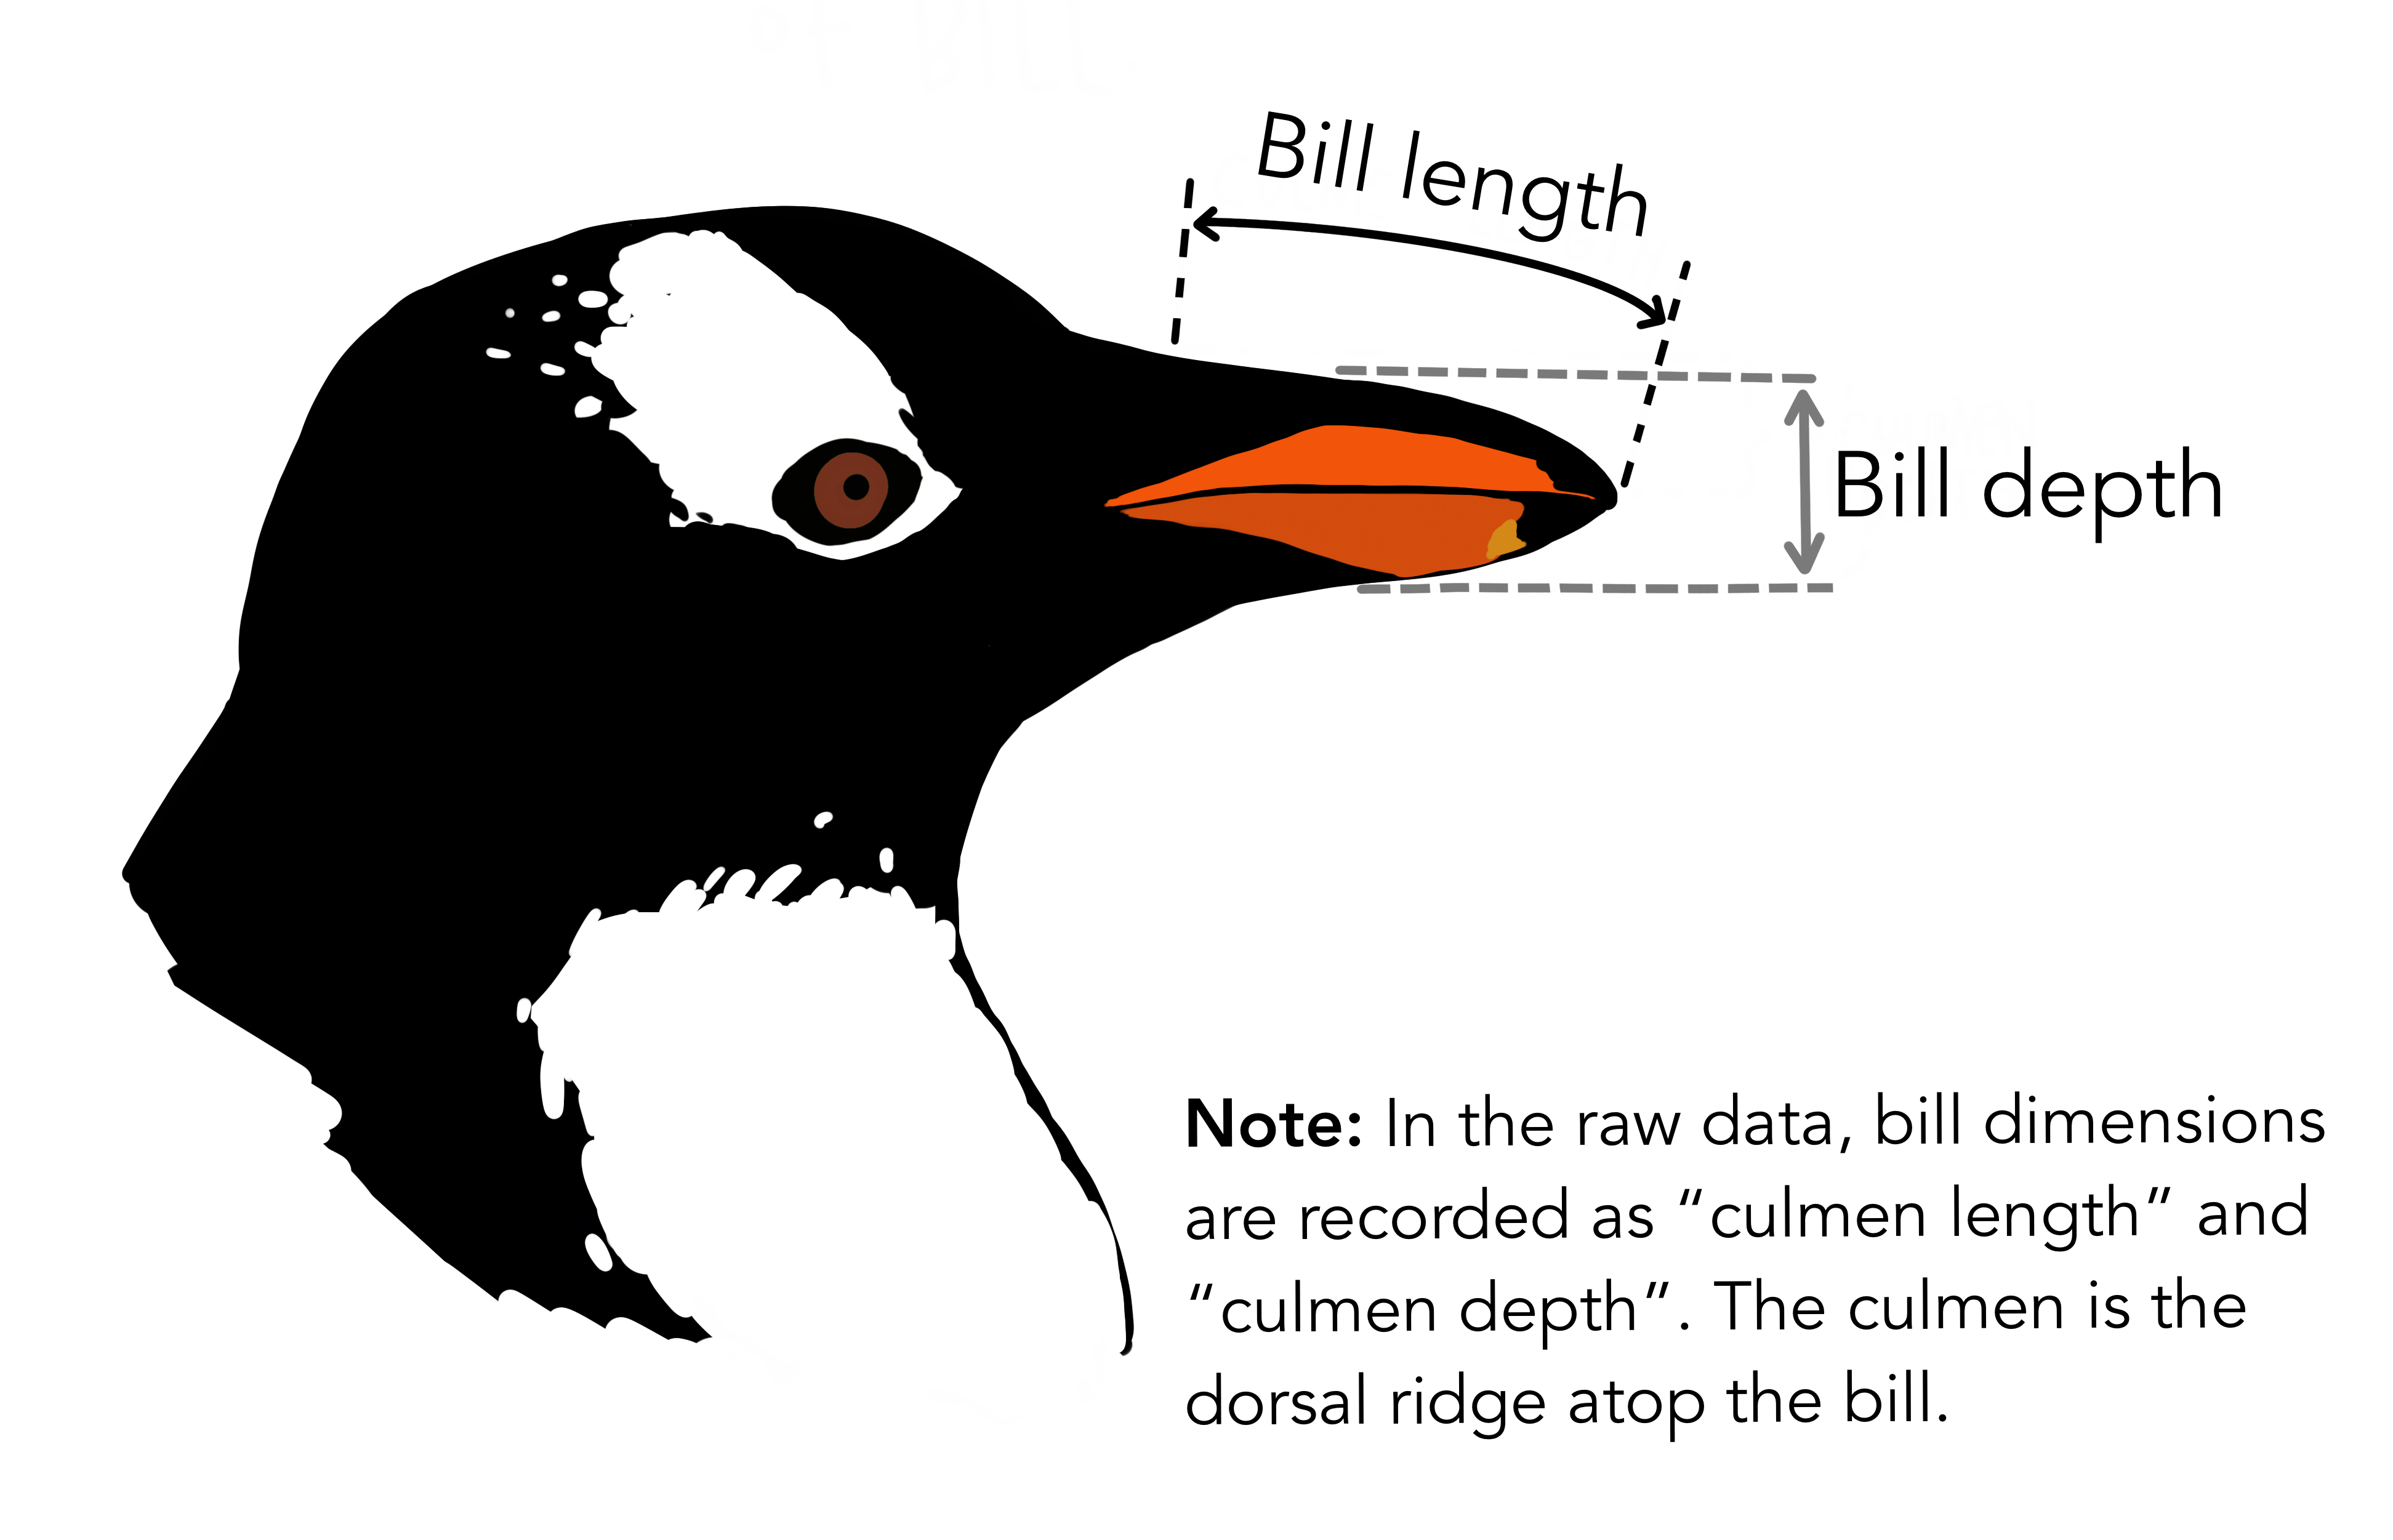 Diagram of penguin head with indication of bill length and bill depth (from Horst, Hill, and Gorman (2020), used with permission)